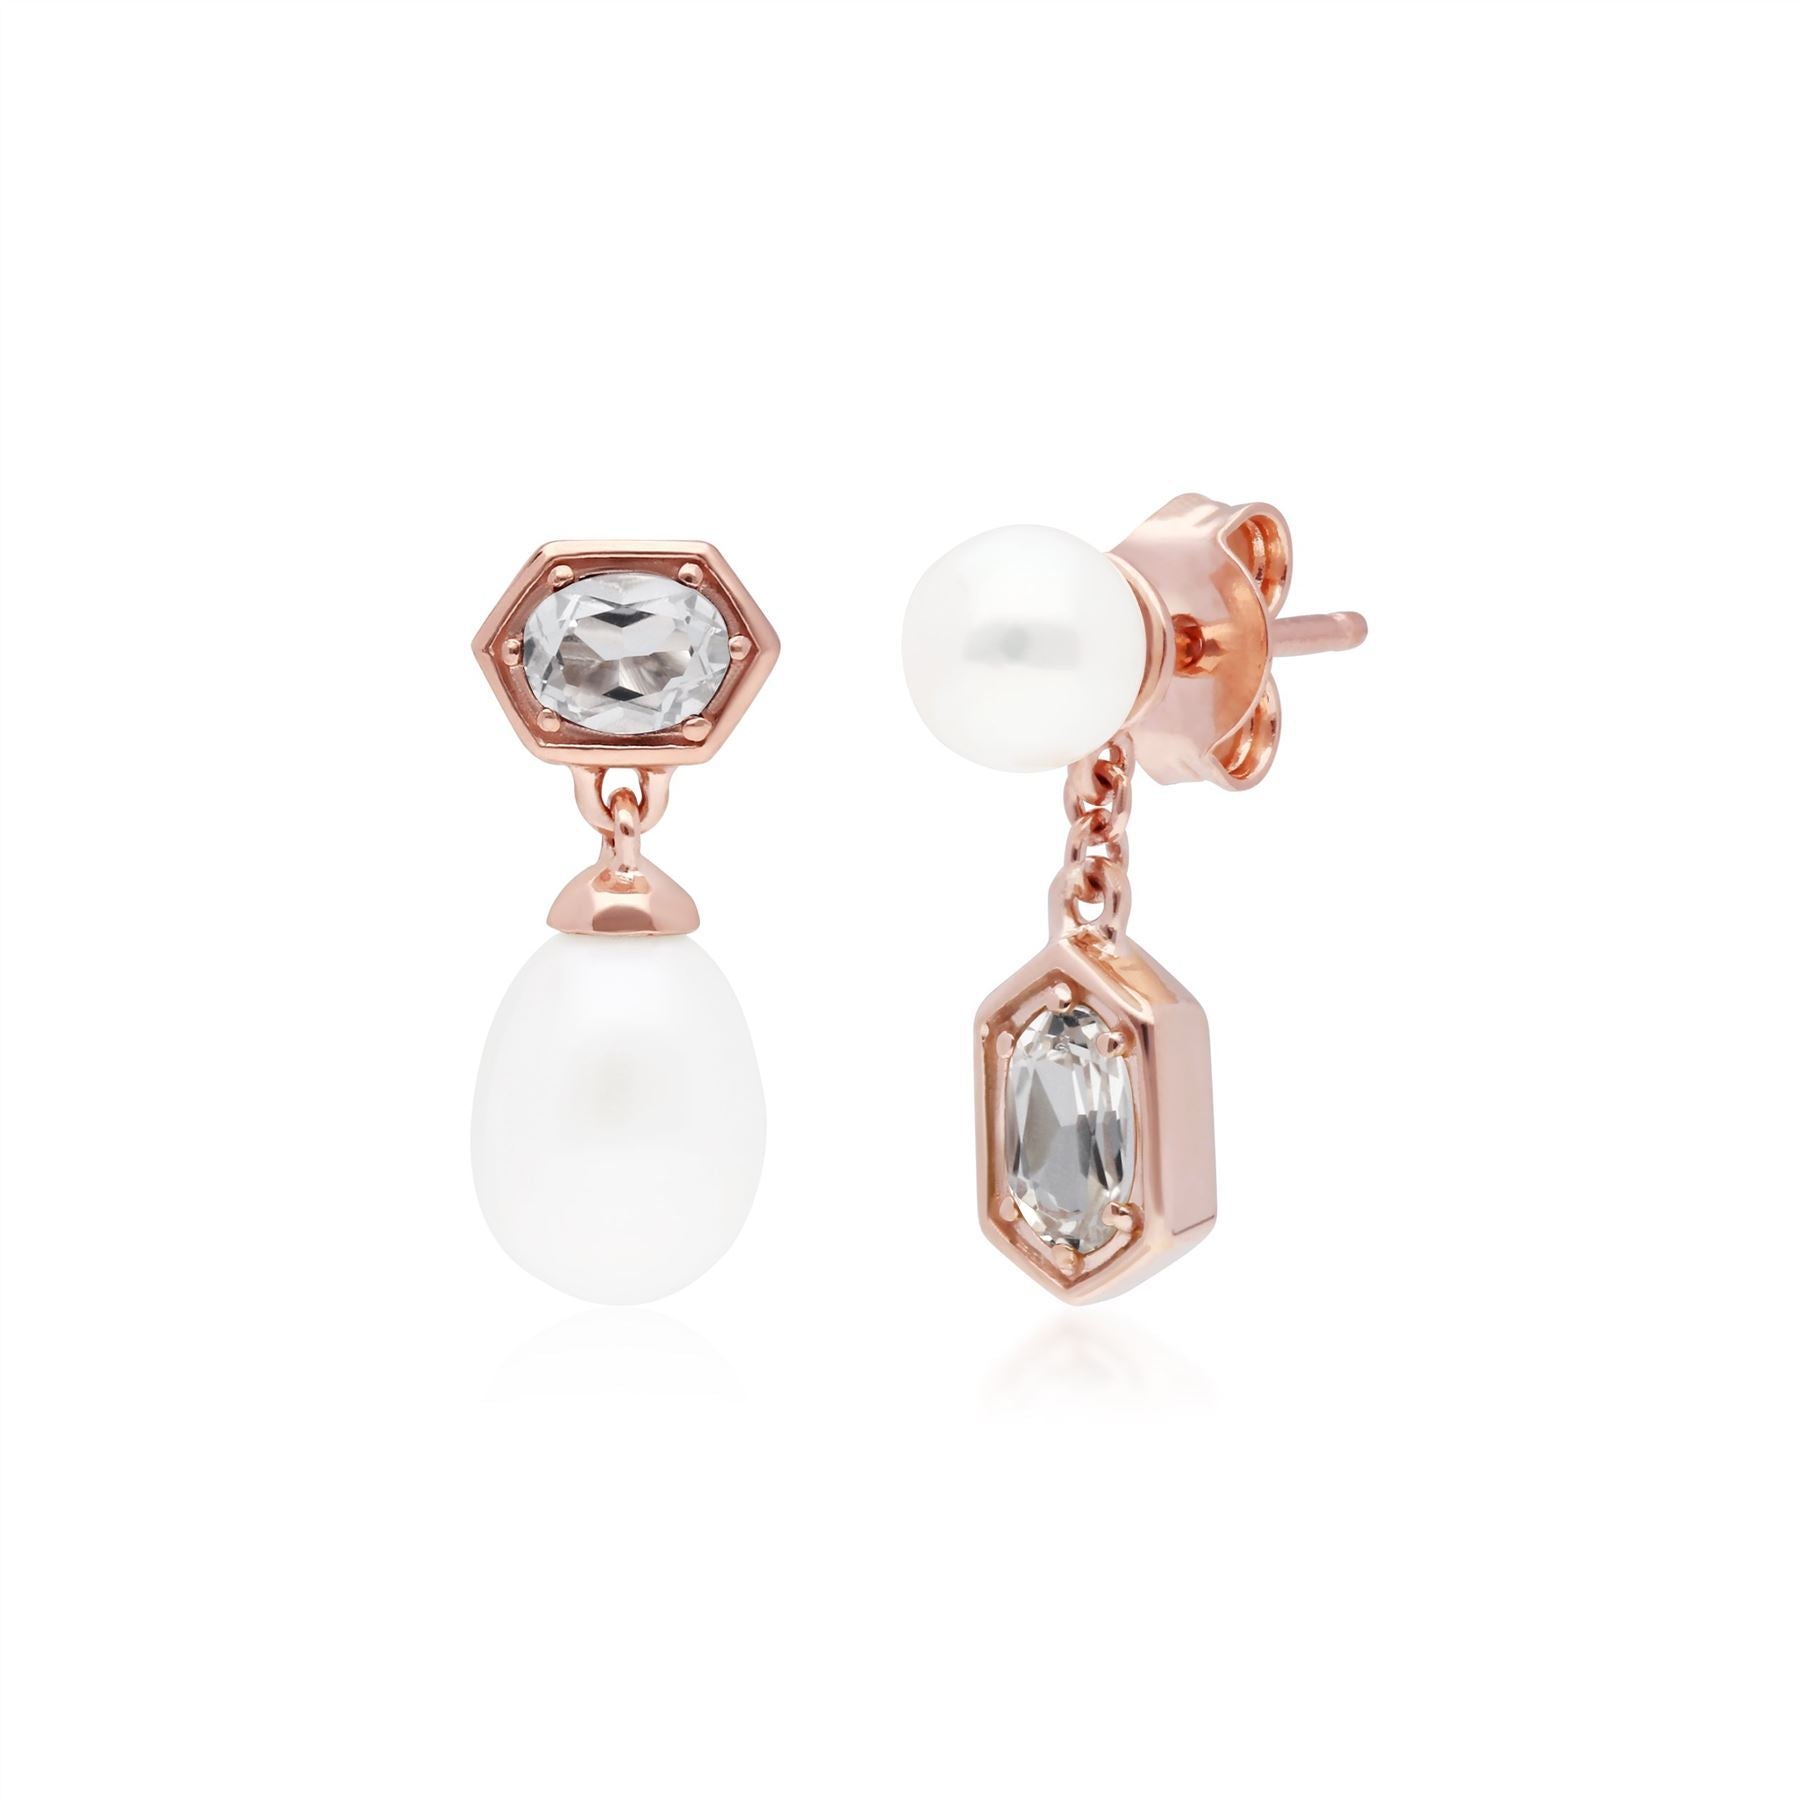 Modern Pearl & White Topaz Mismatched Drop Earrings in Rose Gold Plated Sterling Silver